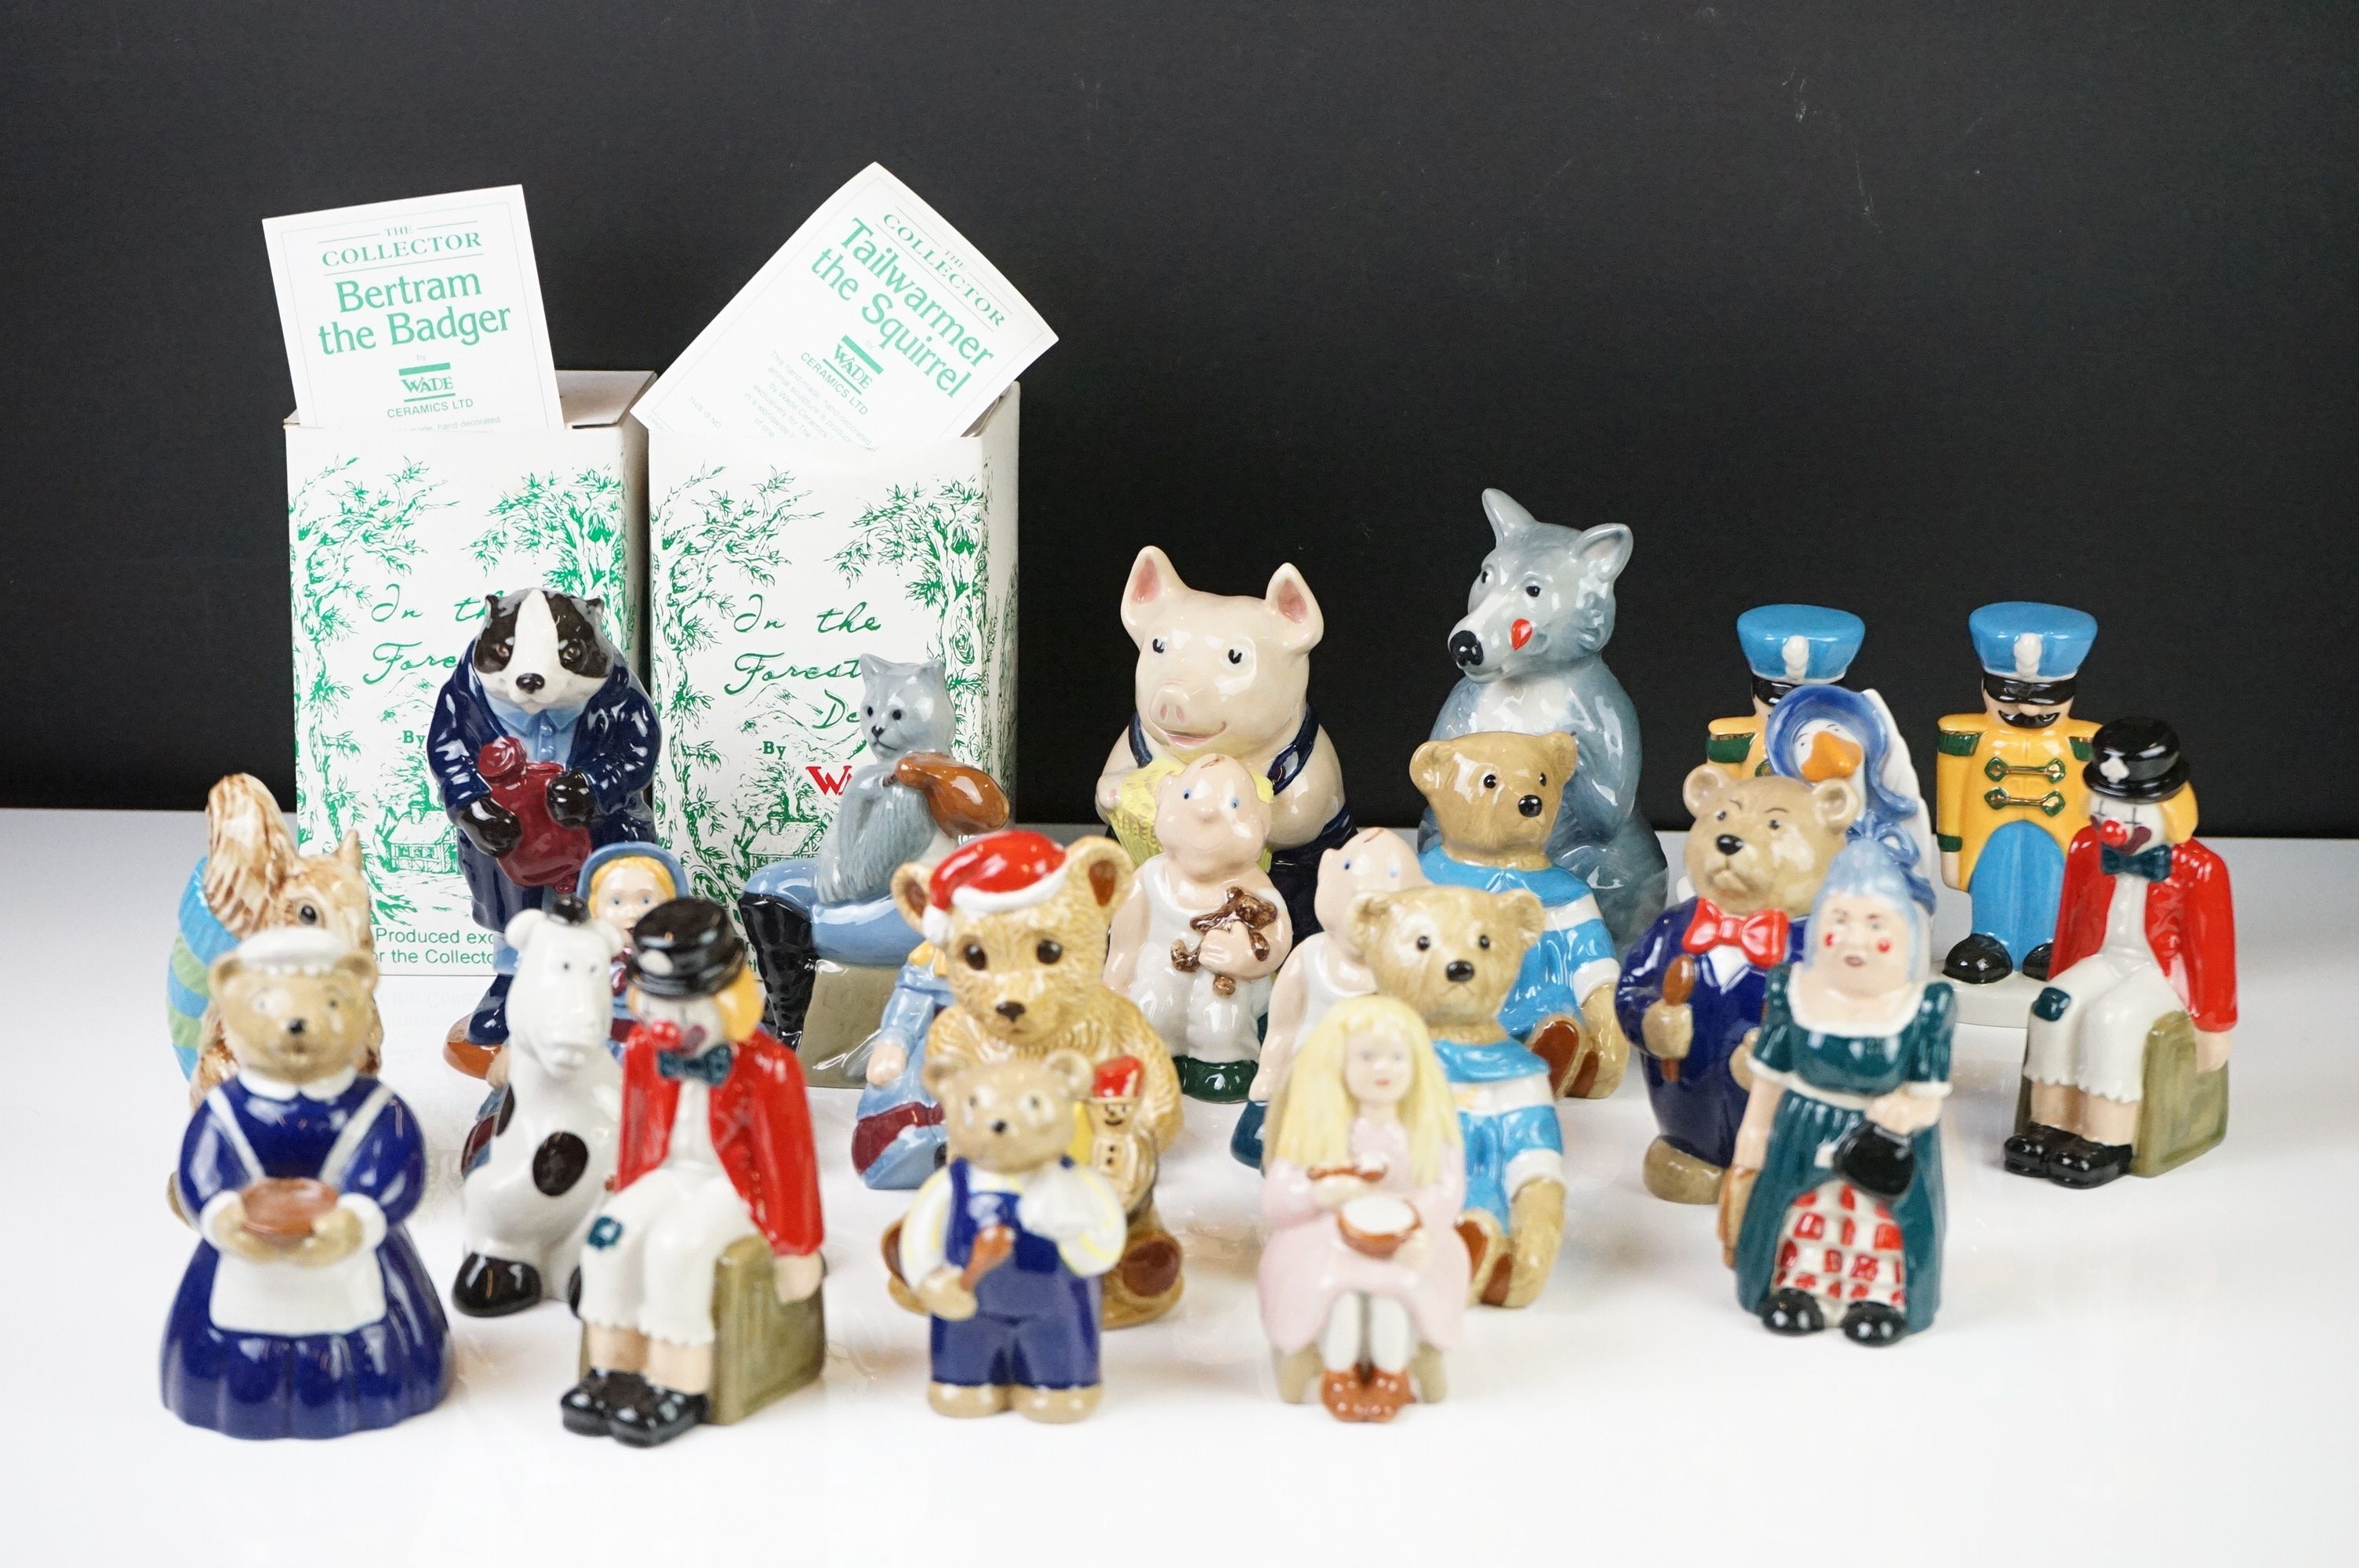 Approximately Twenty Three Wade Collector Club Figures including Boxed Bertram the Badger and